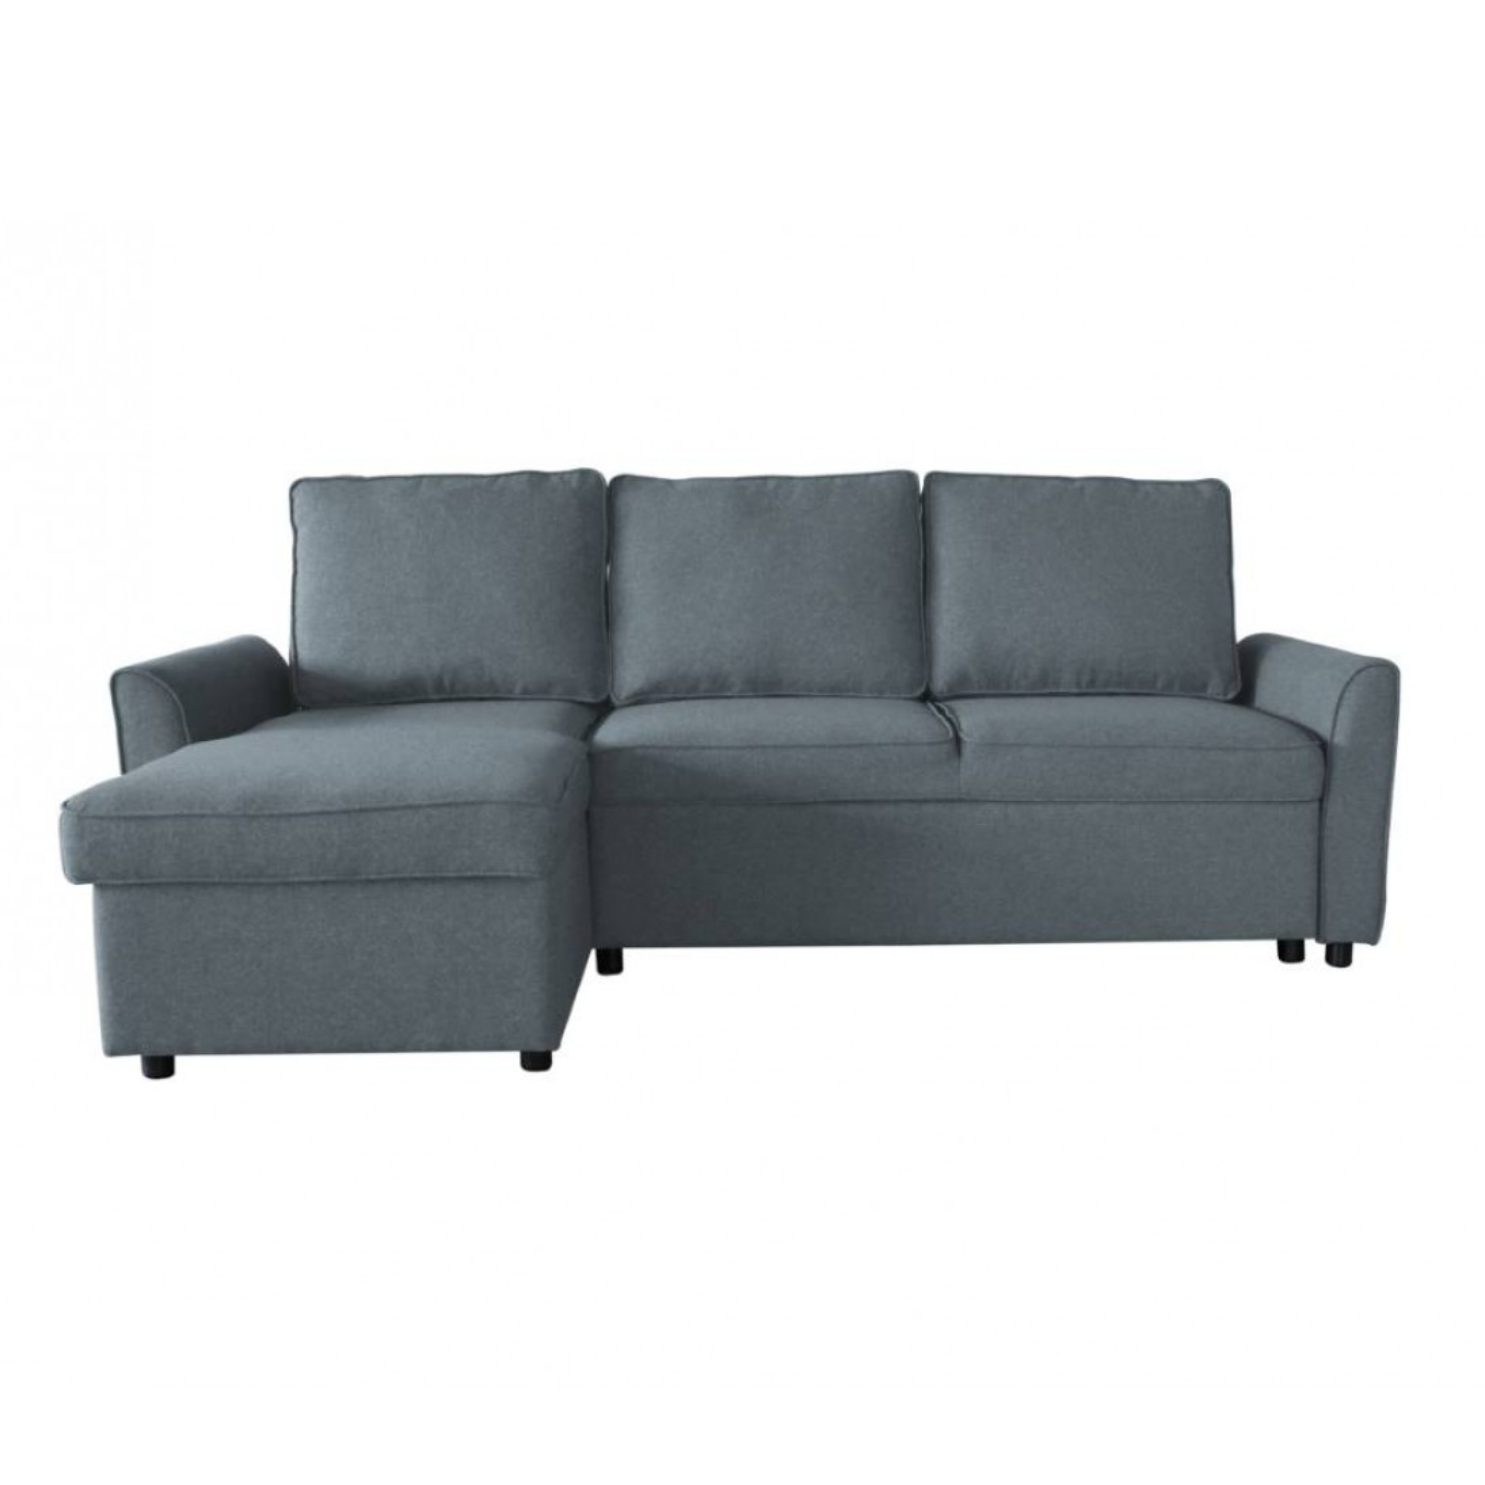 Ruby Sectional Corner Sofabed - Grey